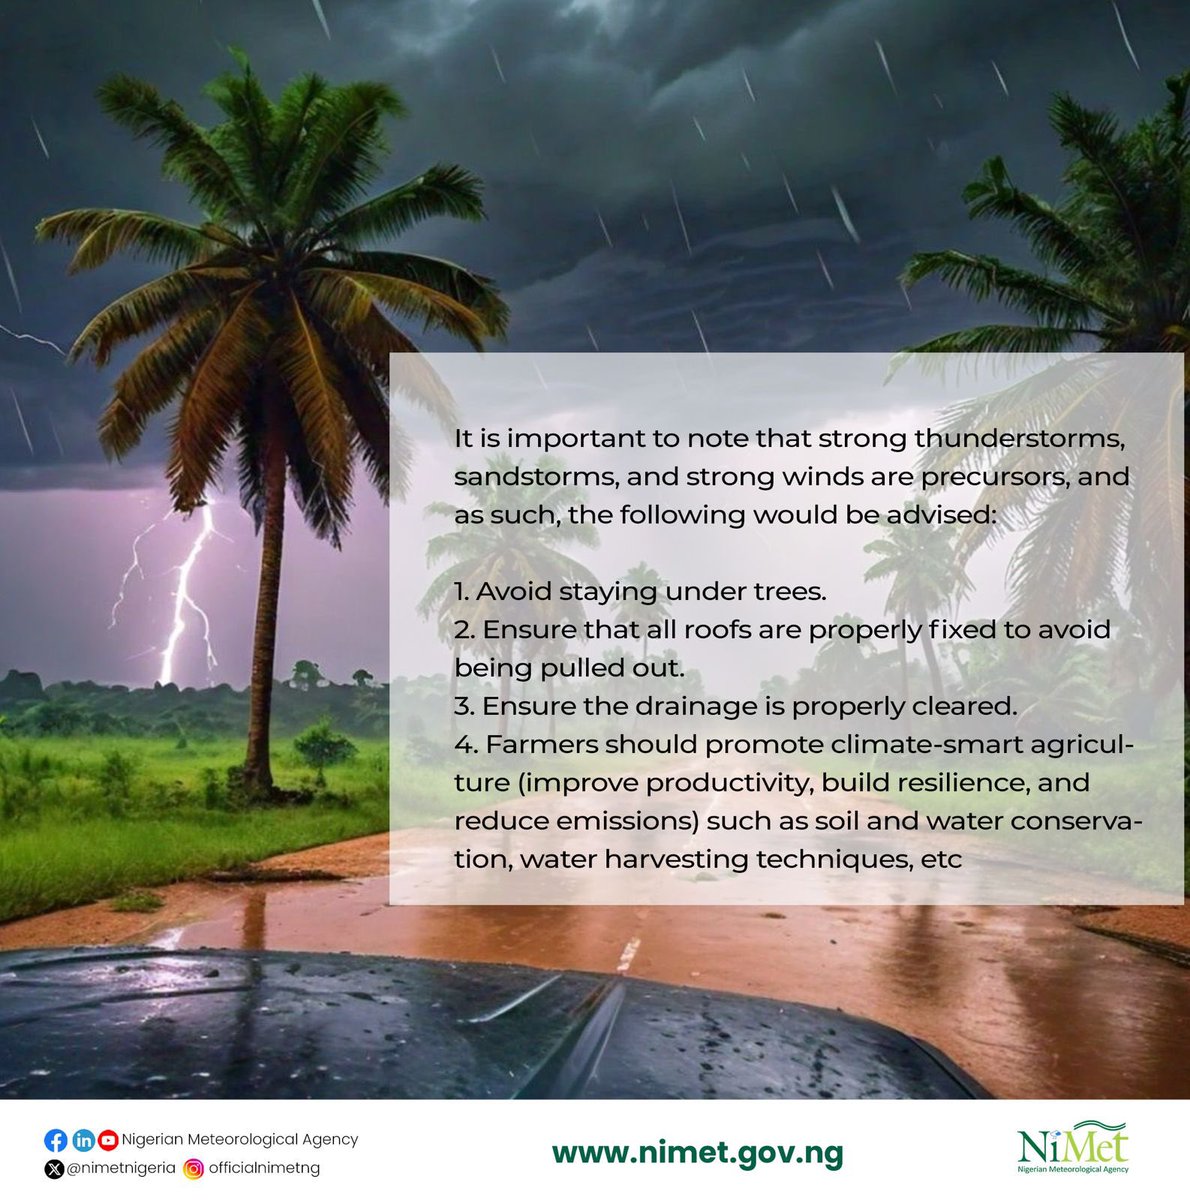 May Weather Outlook for the country. For more details download the Seasonal Climate Prediction from our website nimet.gov.ng #weatheradvisory #responseAbility #earlywarningsforall #nimet #weatheroutlook